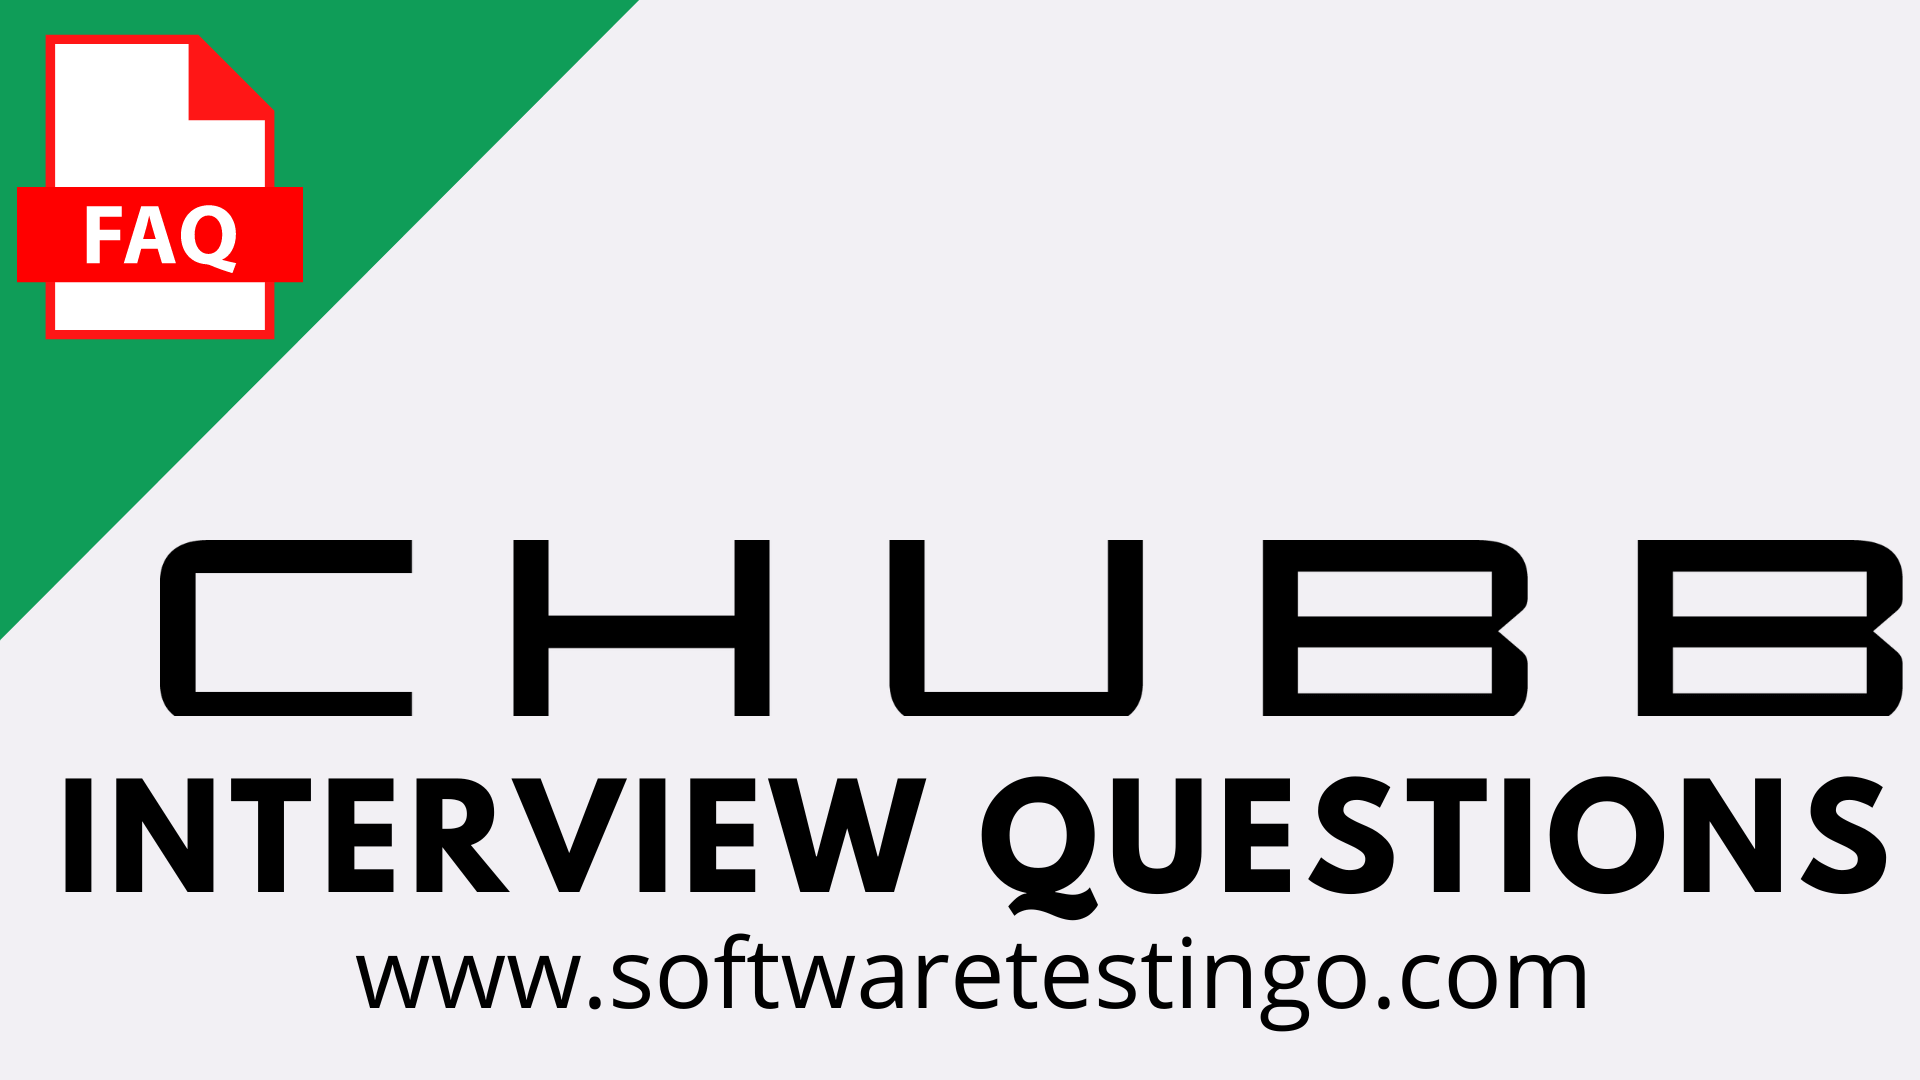 Chubb Corp Interview Questions